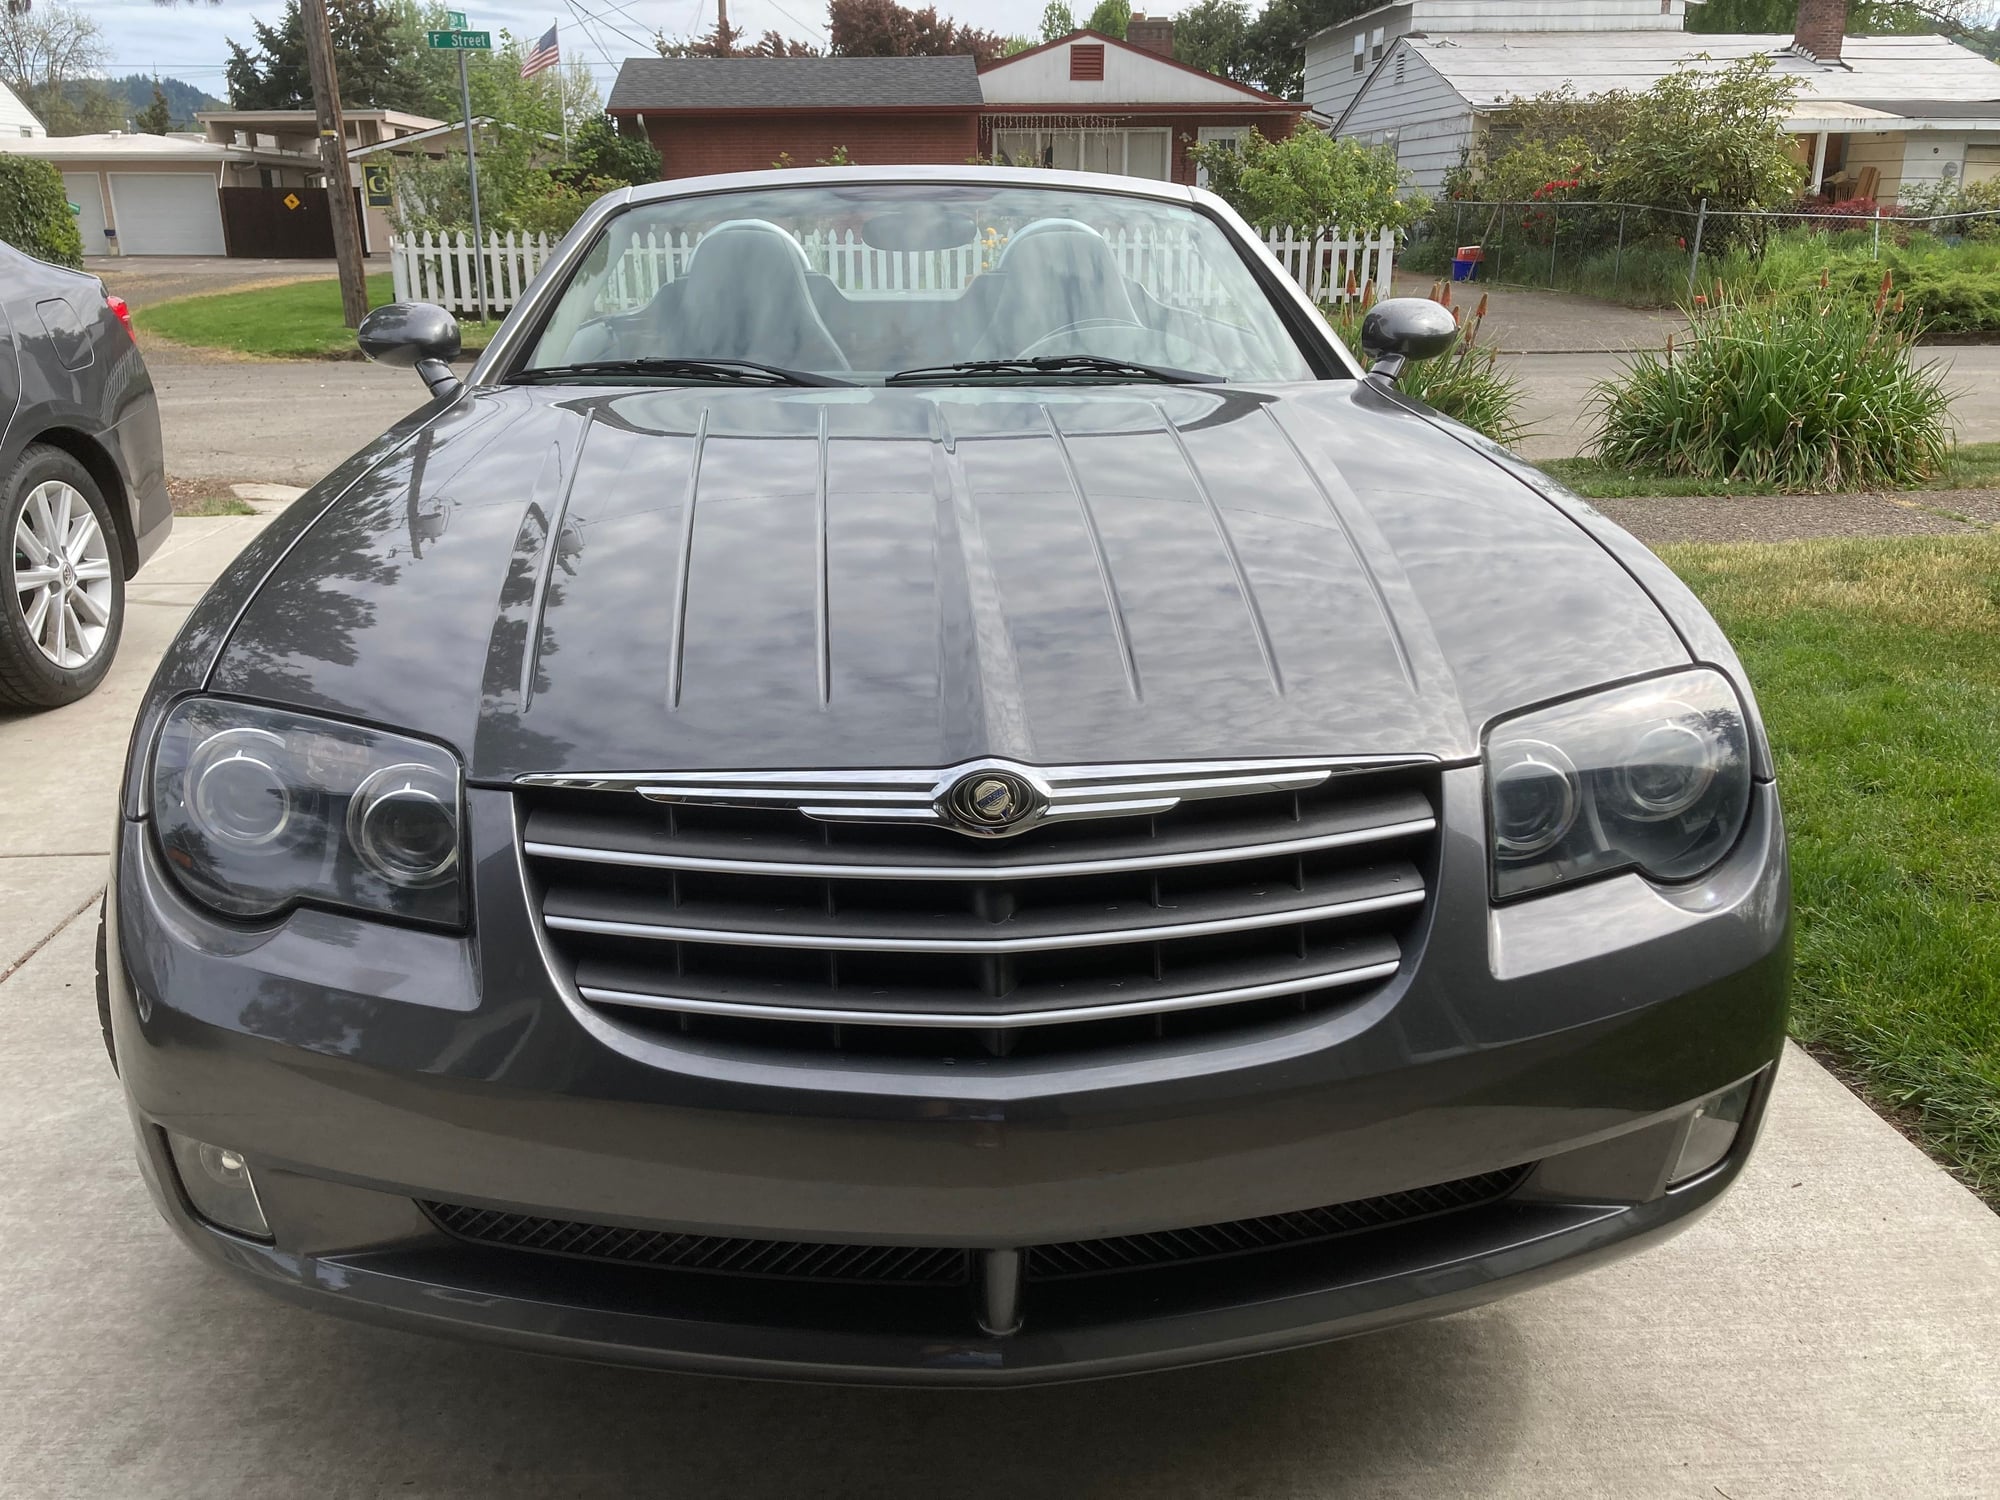 2005 Chrysler Crossfire - 2005 Crossfire Limited Roadster, 6 Speed - Used - VIN 1C3AN65LX5X051522 - 18,665 Miles - 6 cyl - 2WD - Manual - Convertible - Gray - Springfield, OR 97477, United States